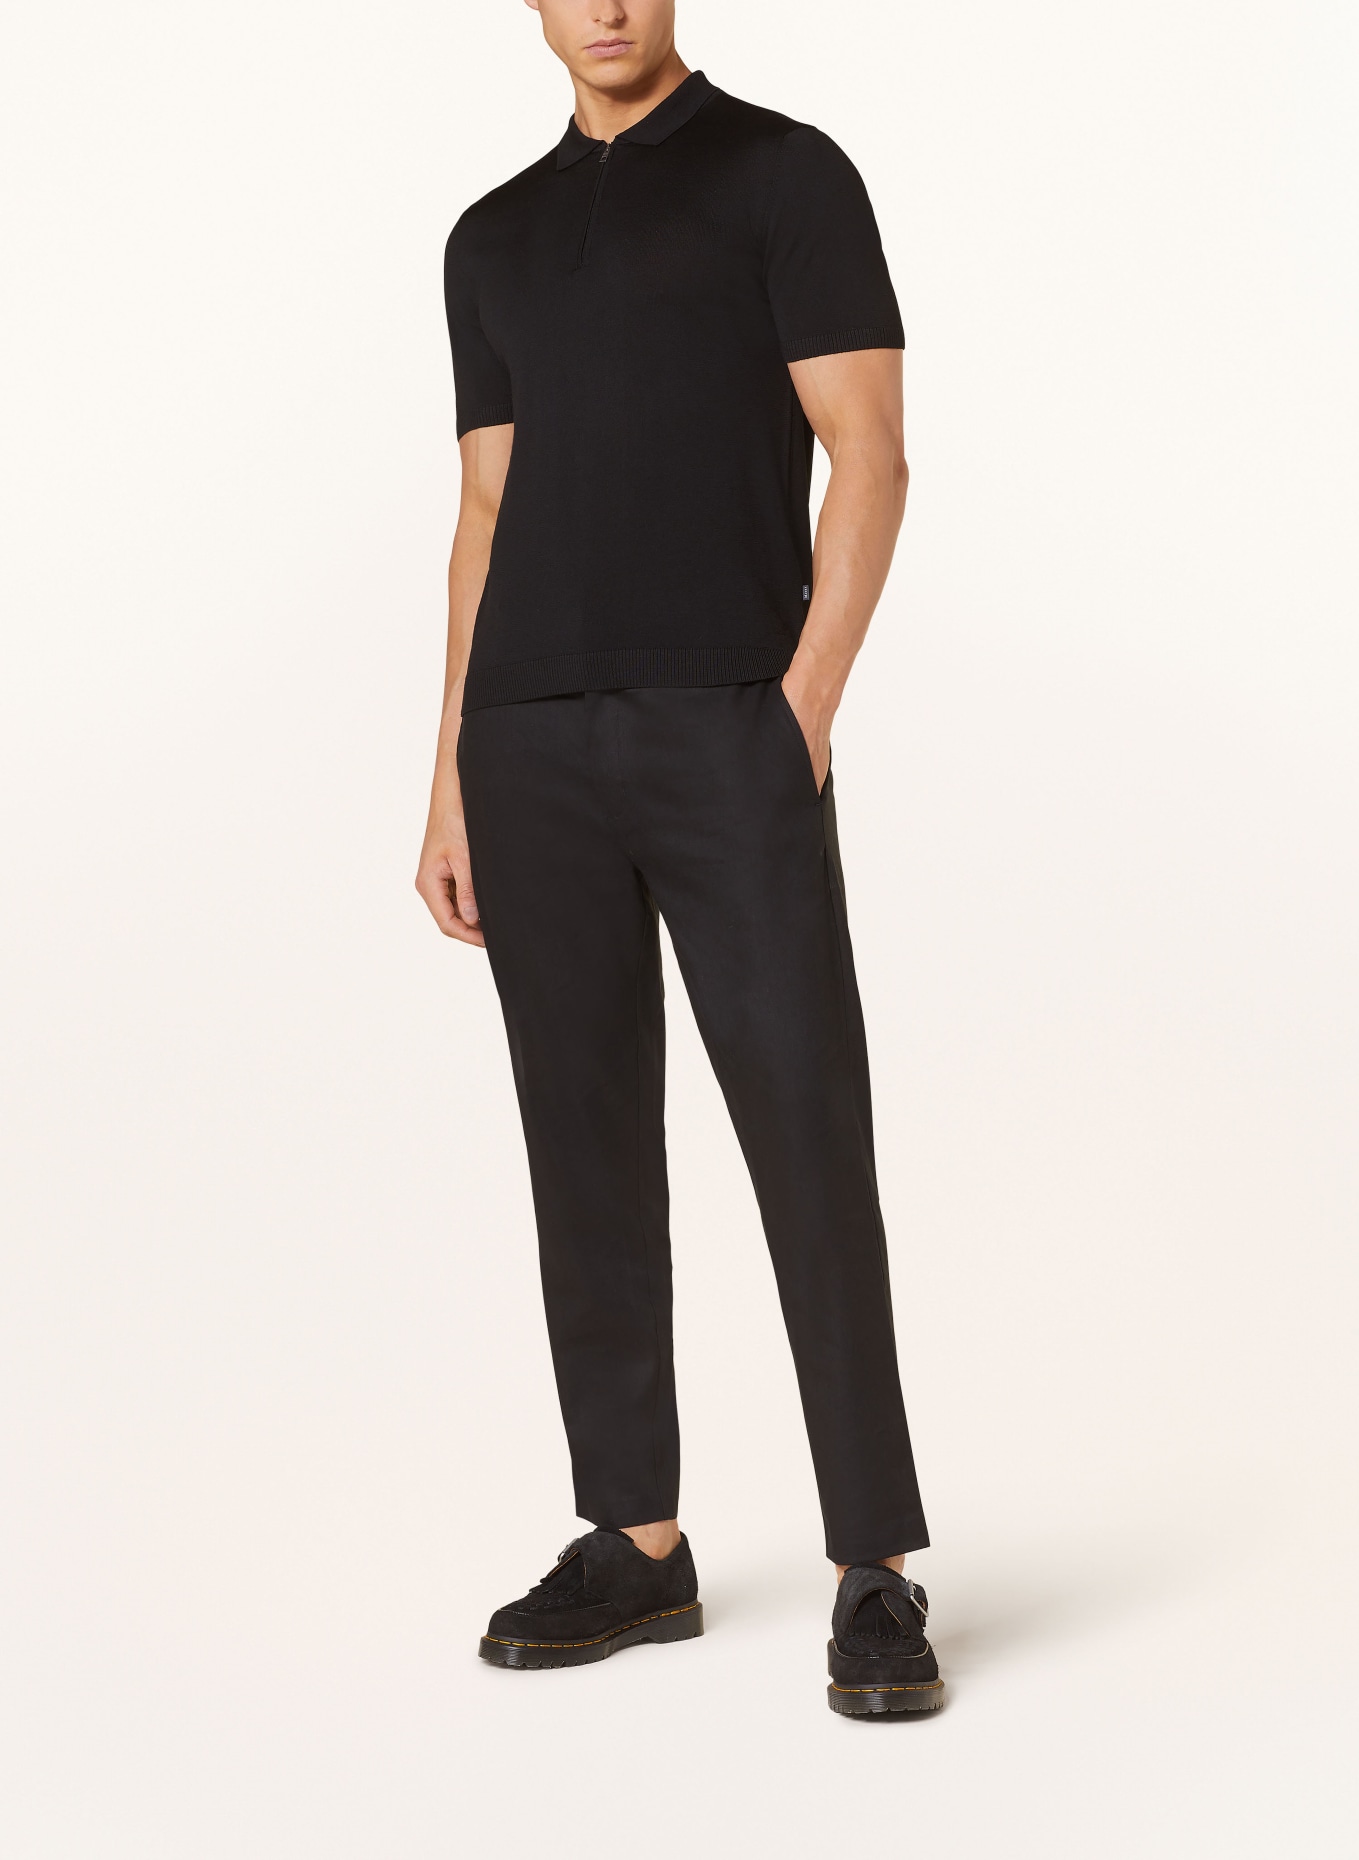 MAERZ MUENCHEN Knitted polo shirt made of merino wool, Color: BLACK (Image 2)